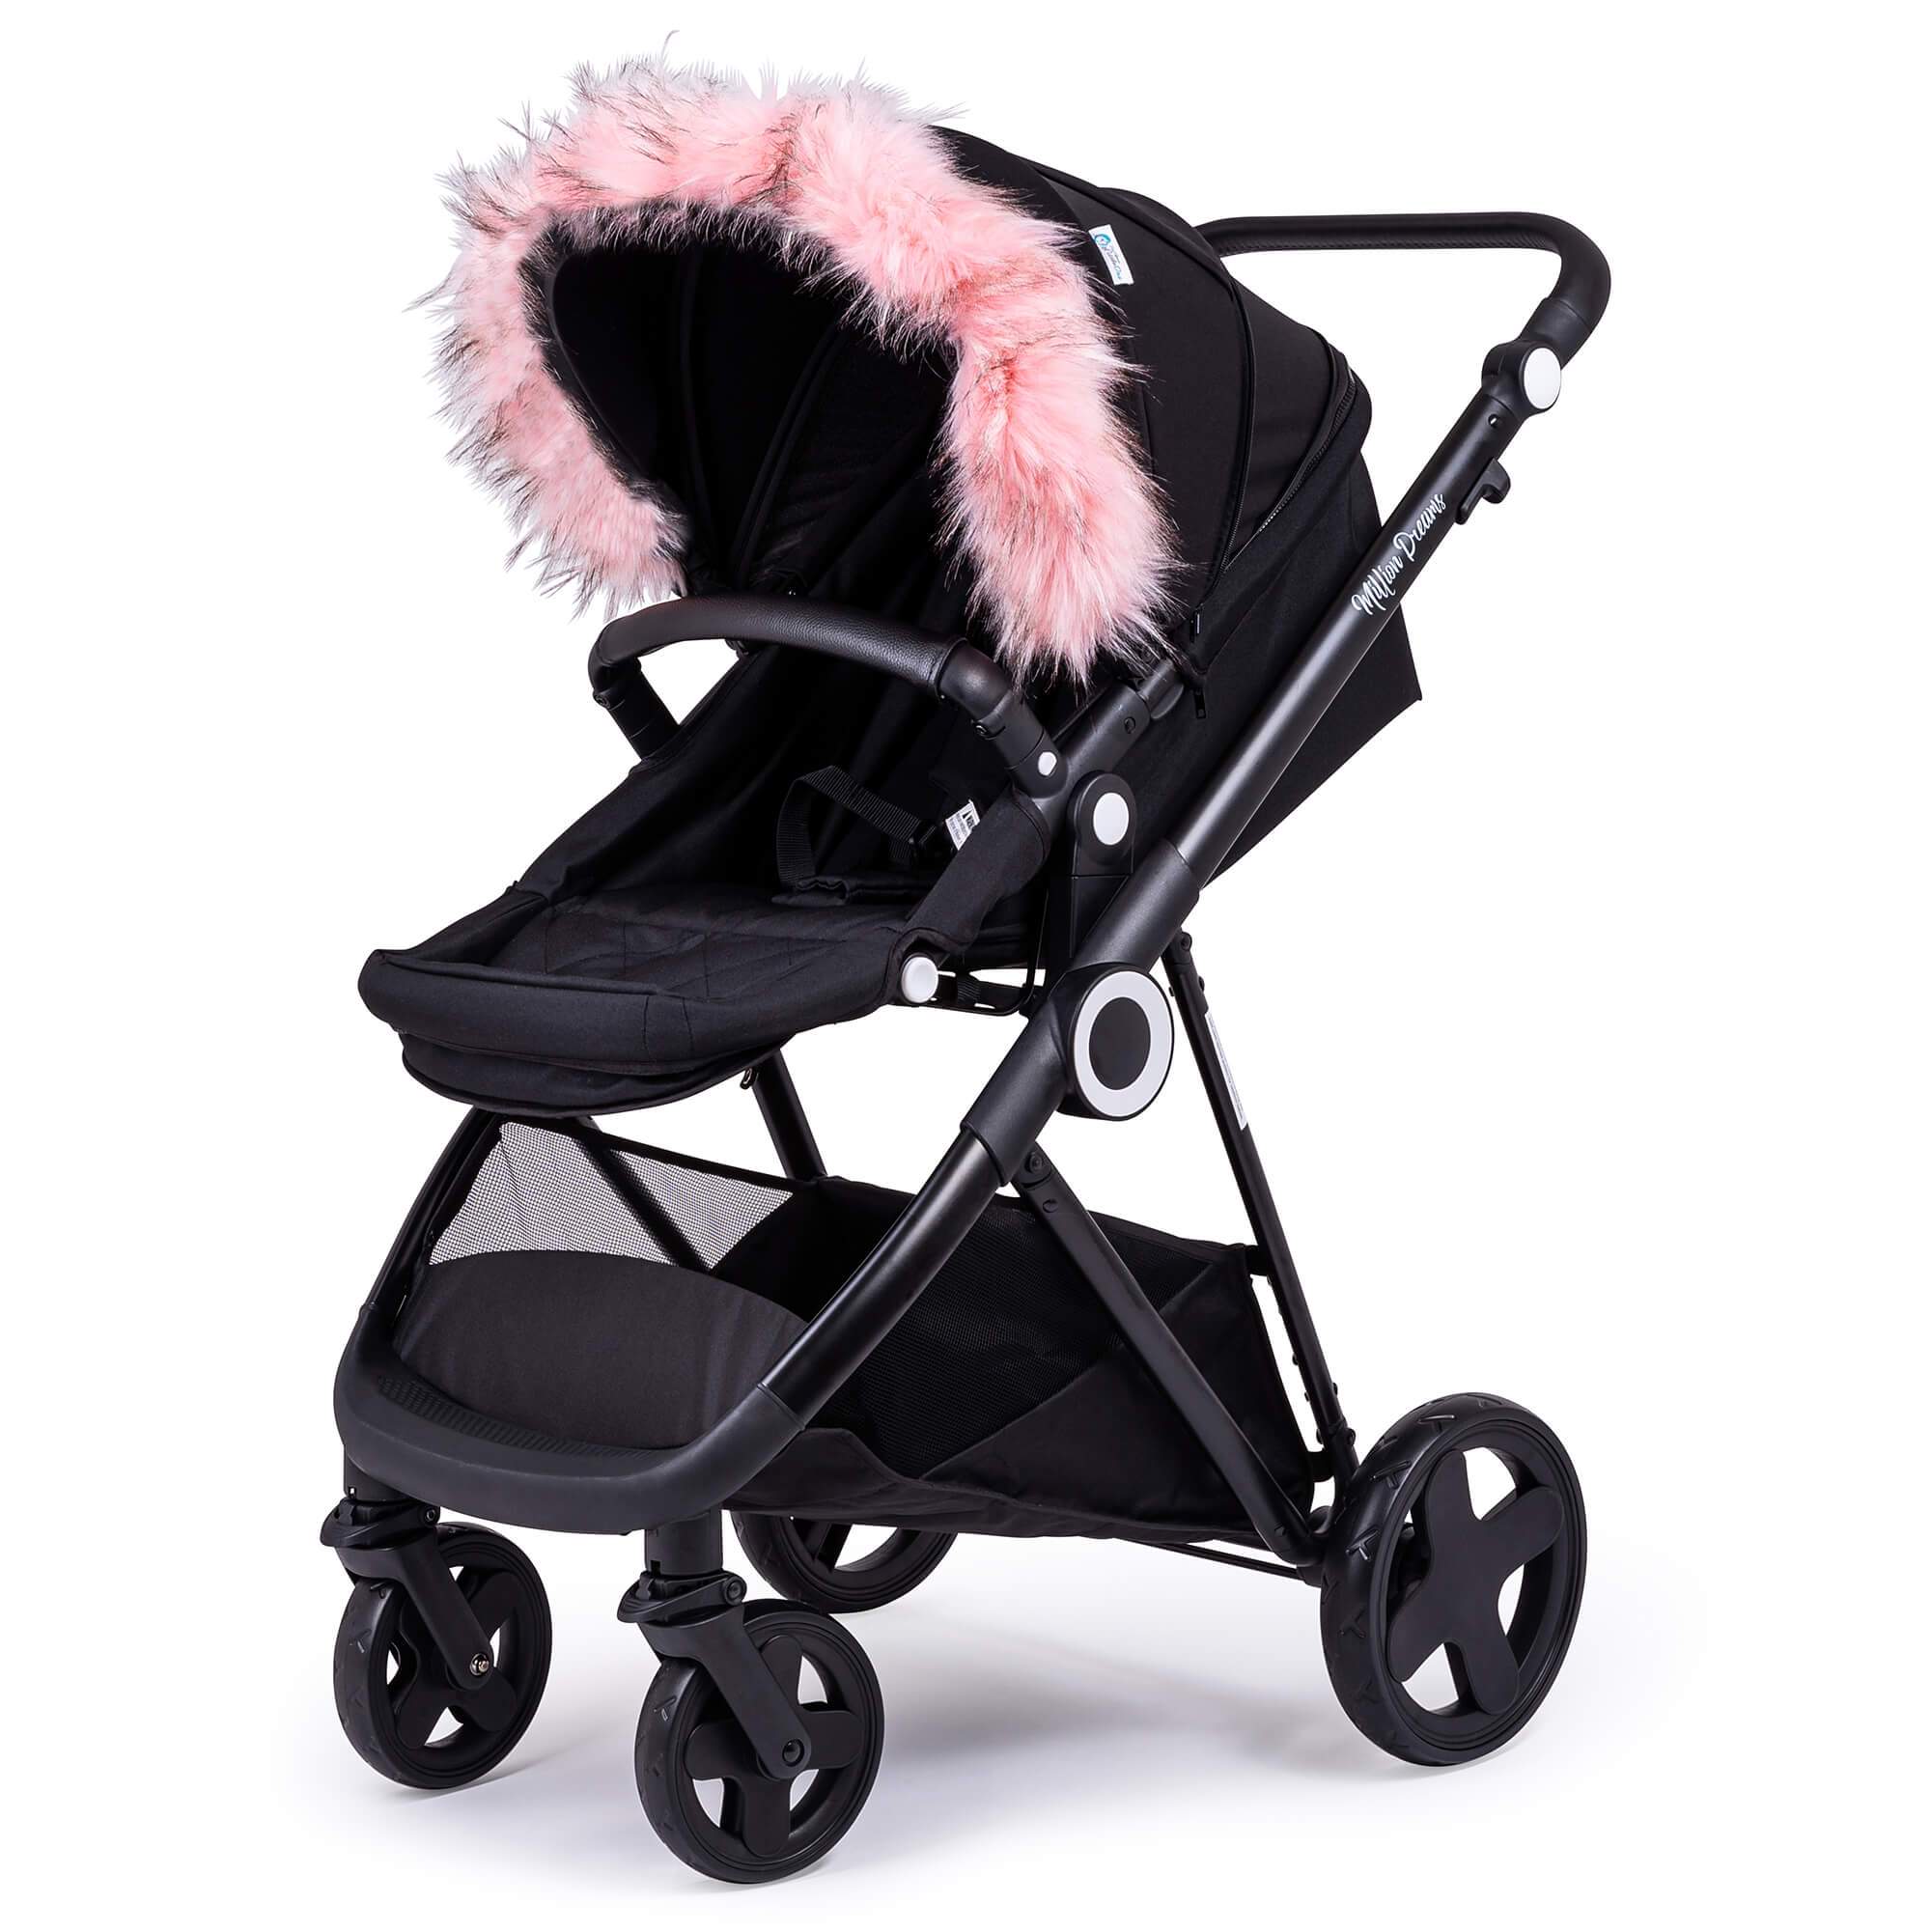 Pram Fur Hood Trim Attachment For Pushchair Compatible with Diono - Light Pink / Fits All Models | For Your Little One